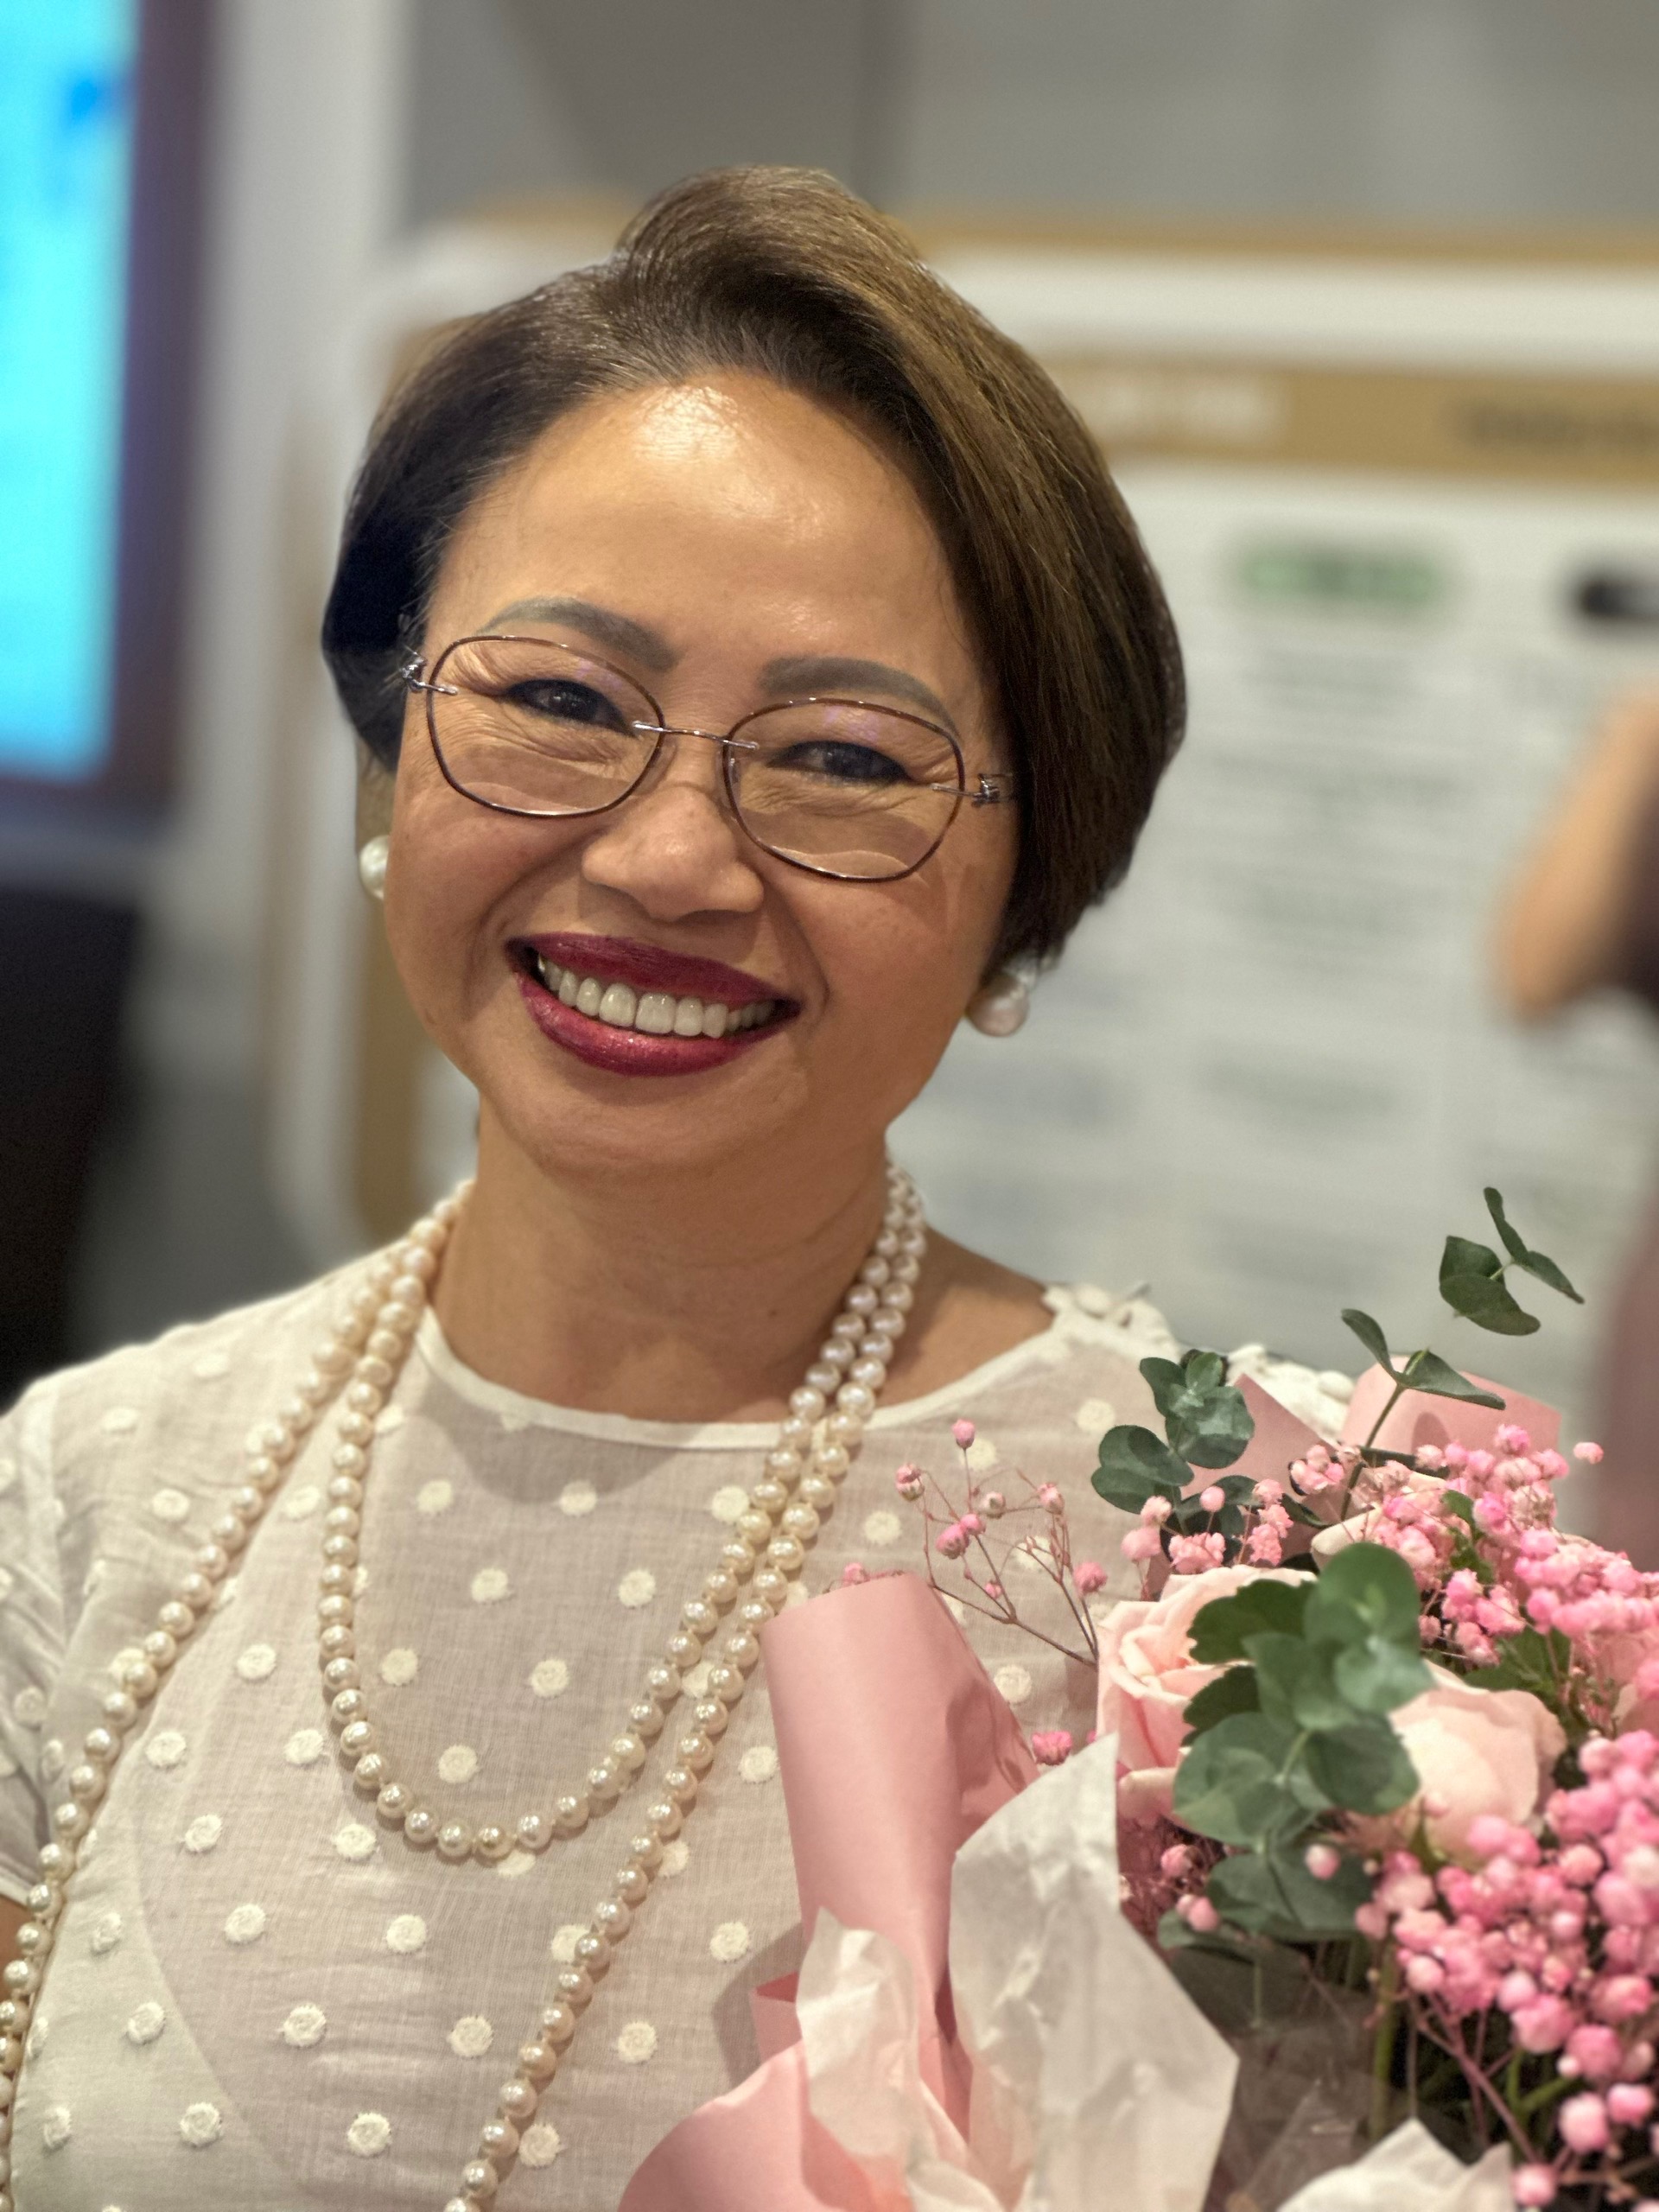 Headshot of Carina Hoang smiling. She is holding a bouquet of lilies.